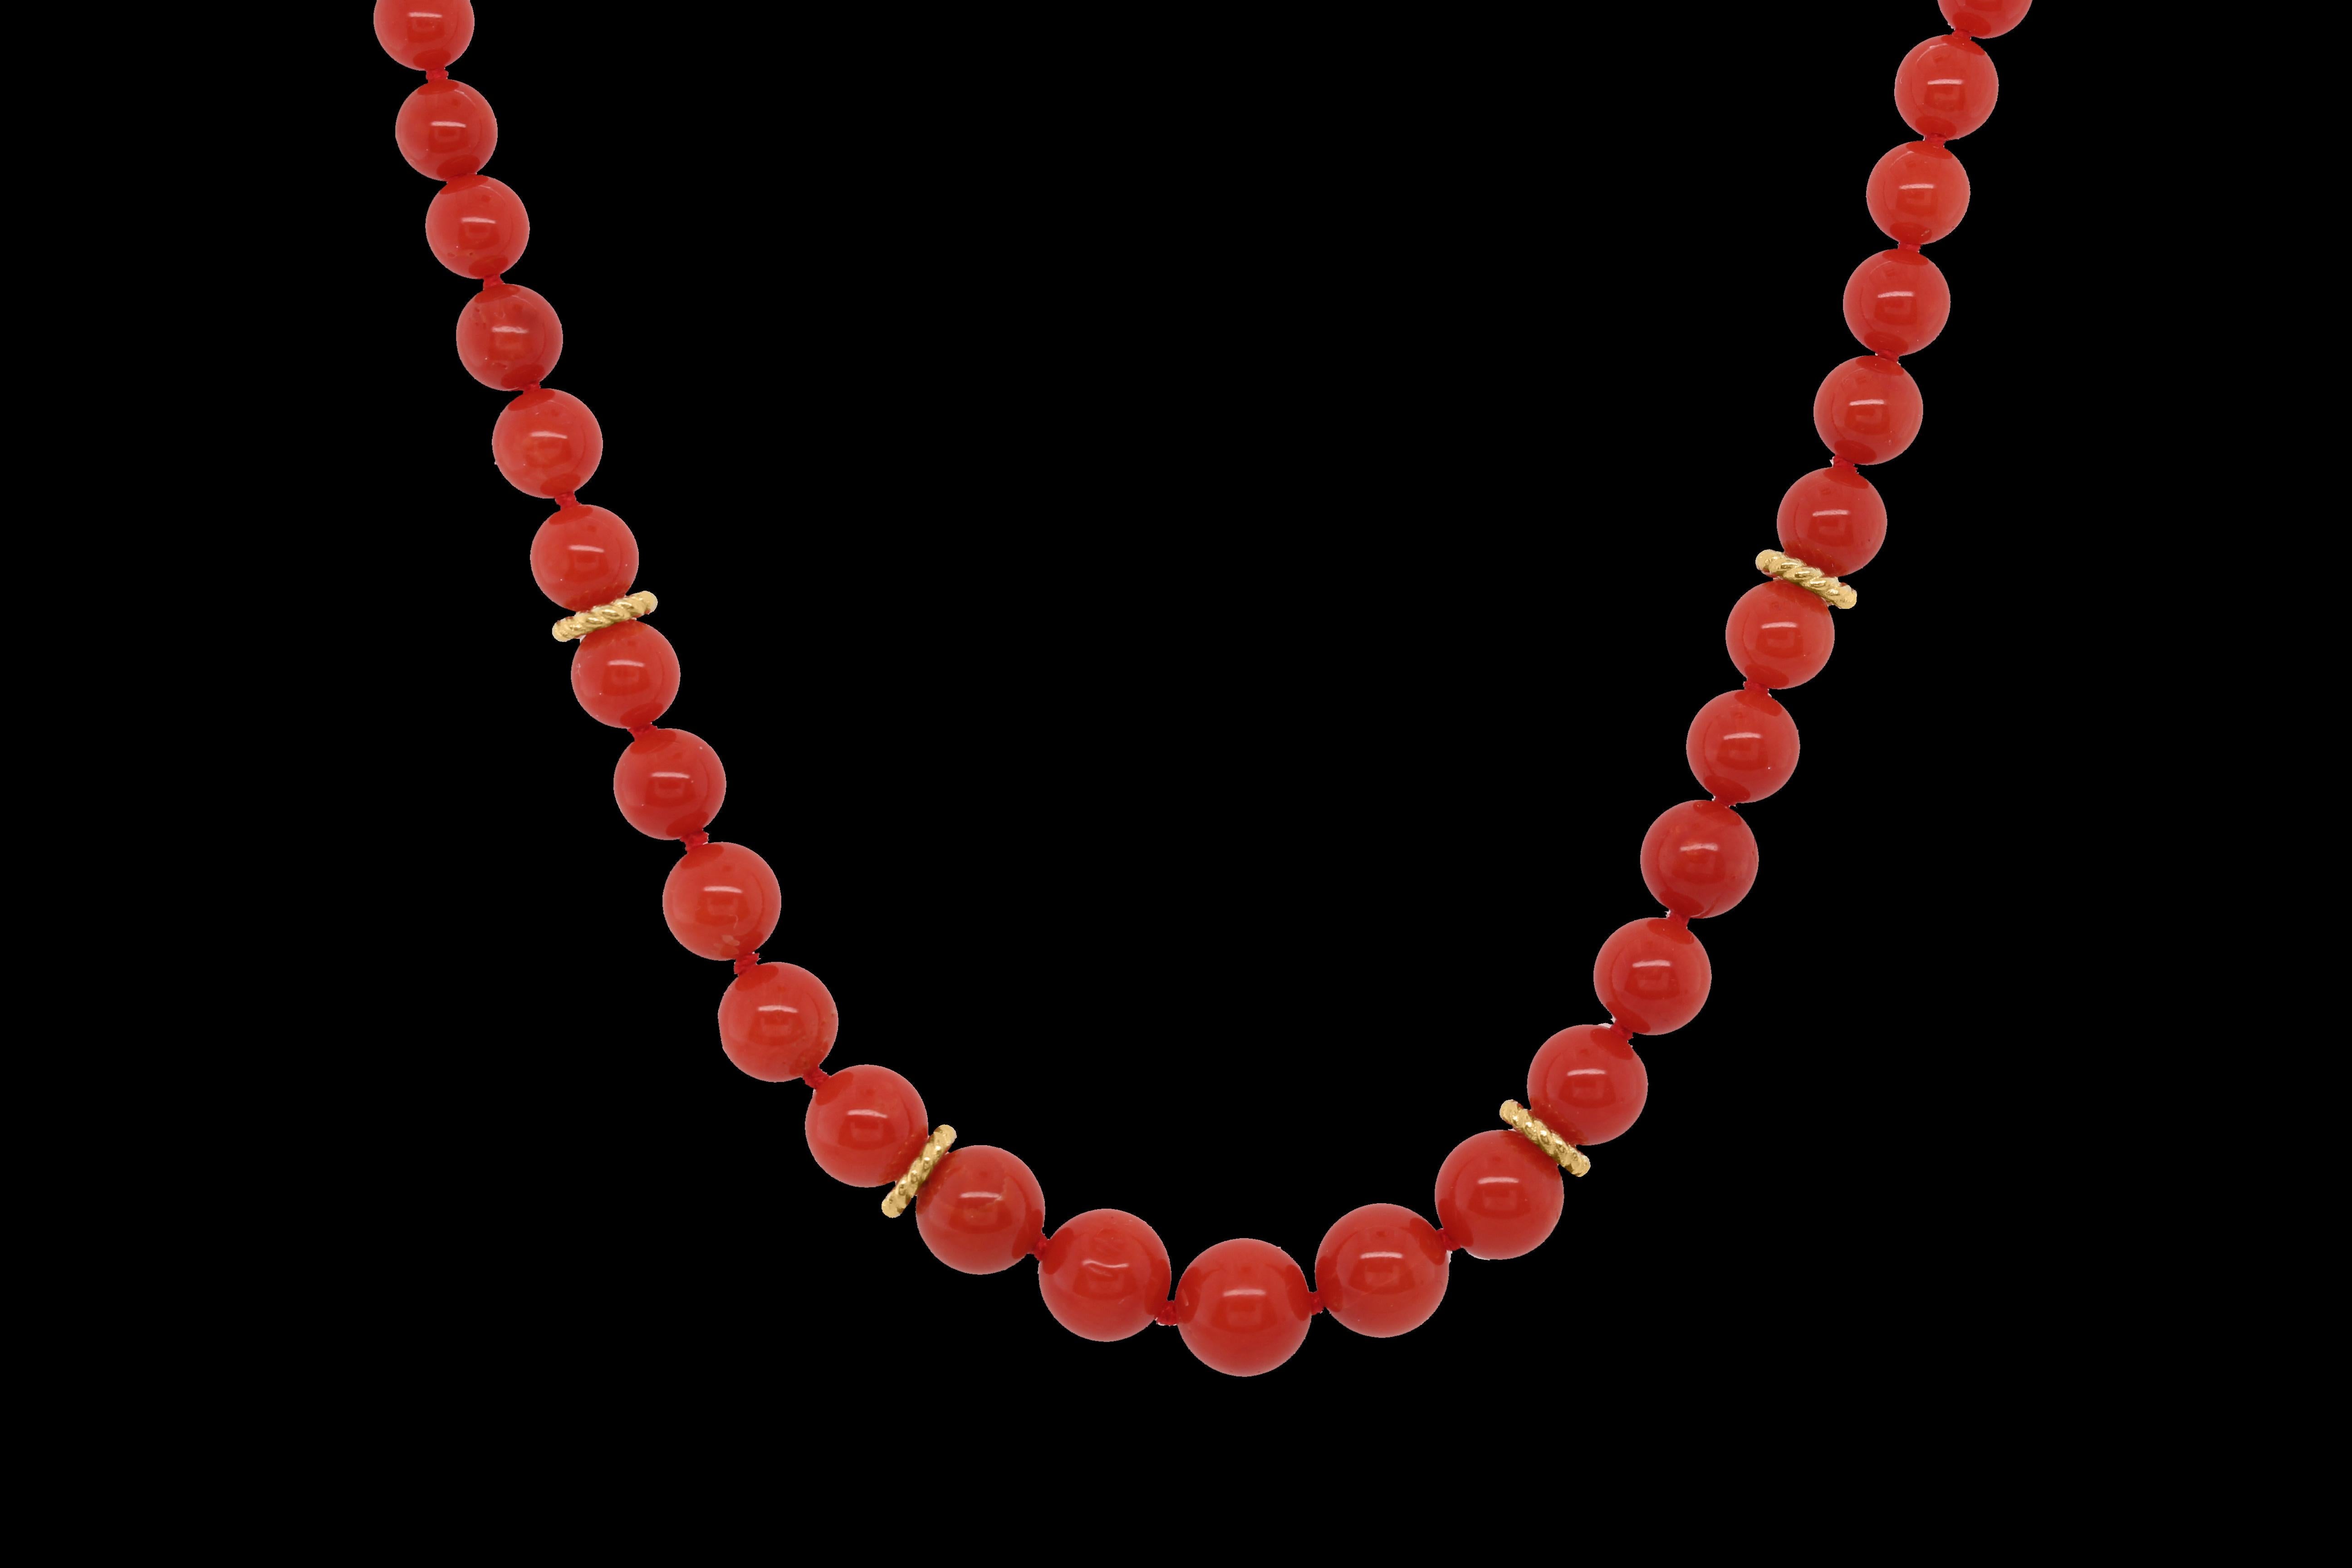 Bright Orange Coral beads measure 6.77mm at the center and graduate to 3.29mm at the clasp (91 coral beads in total). There are 4 gold braided spacers in the front of the necklace. The Castellani® signature clasp and gold braided spacers are in our